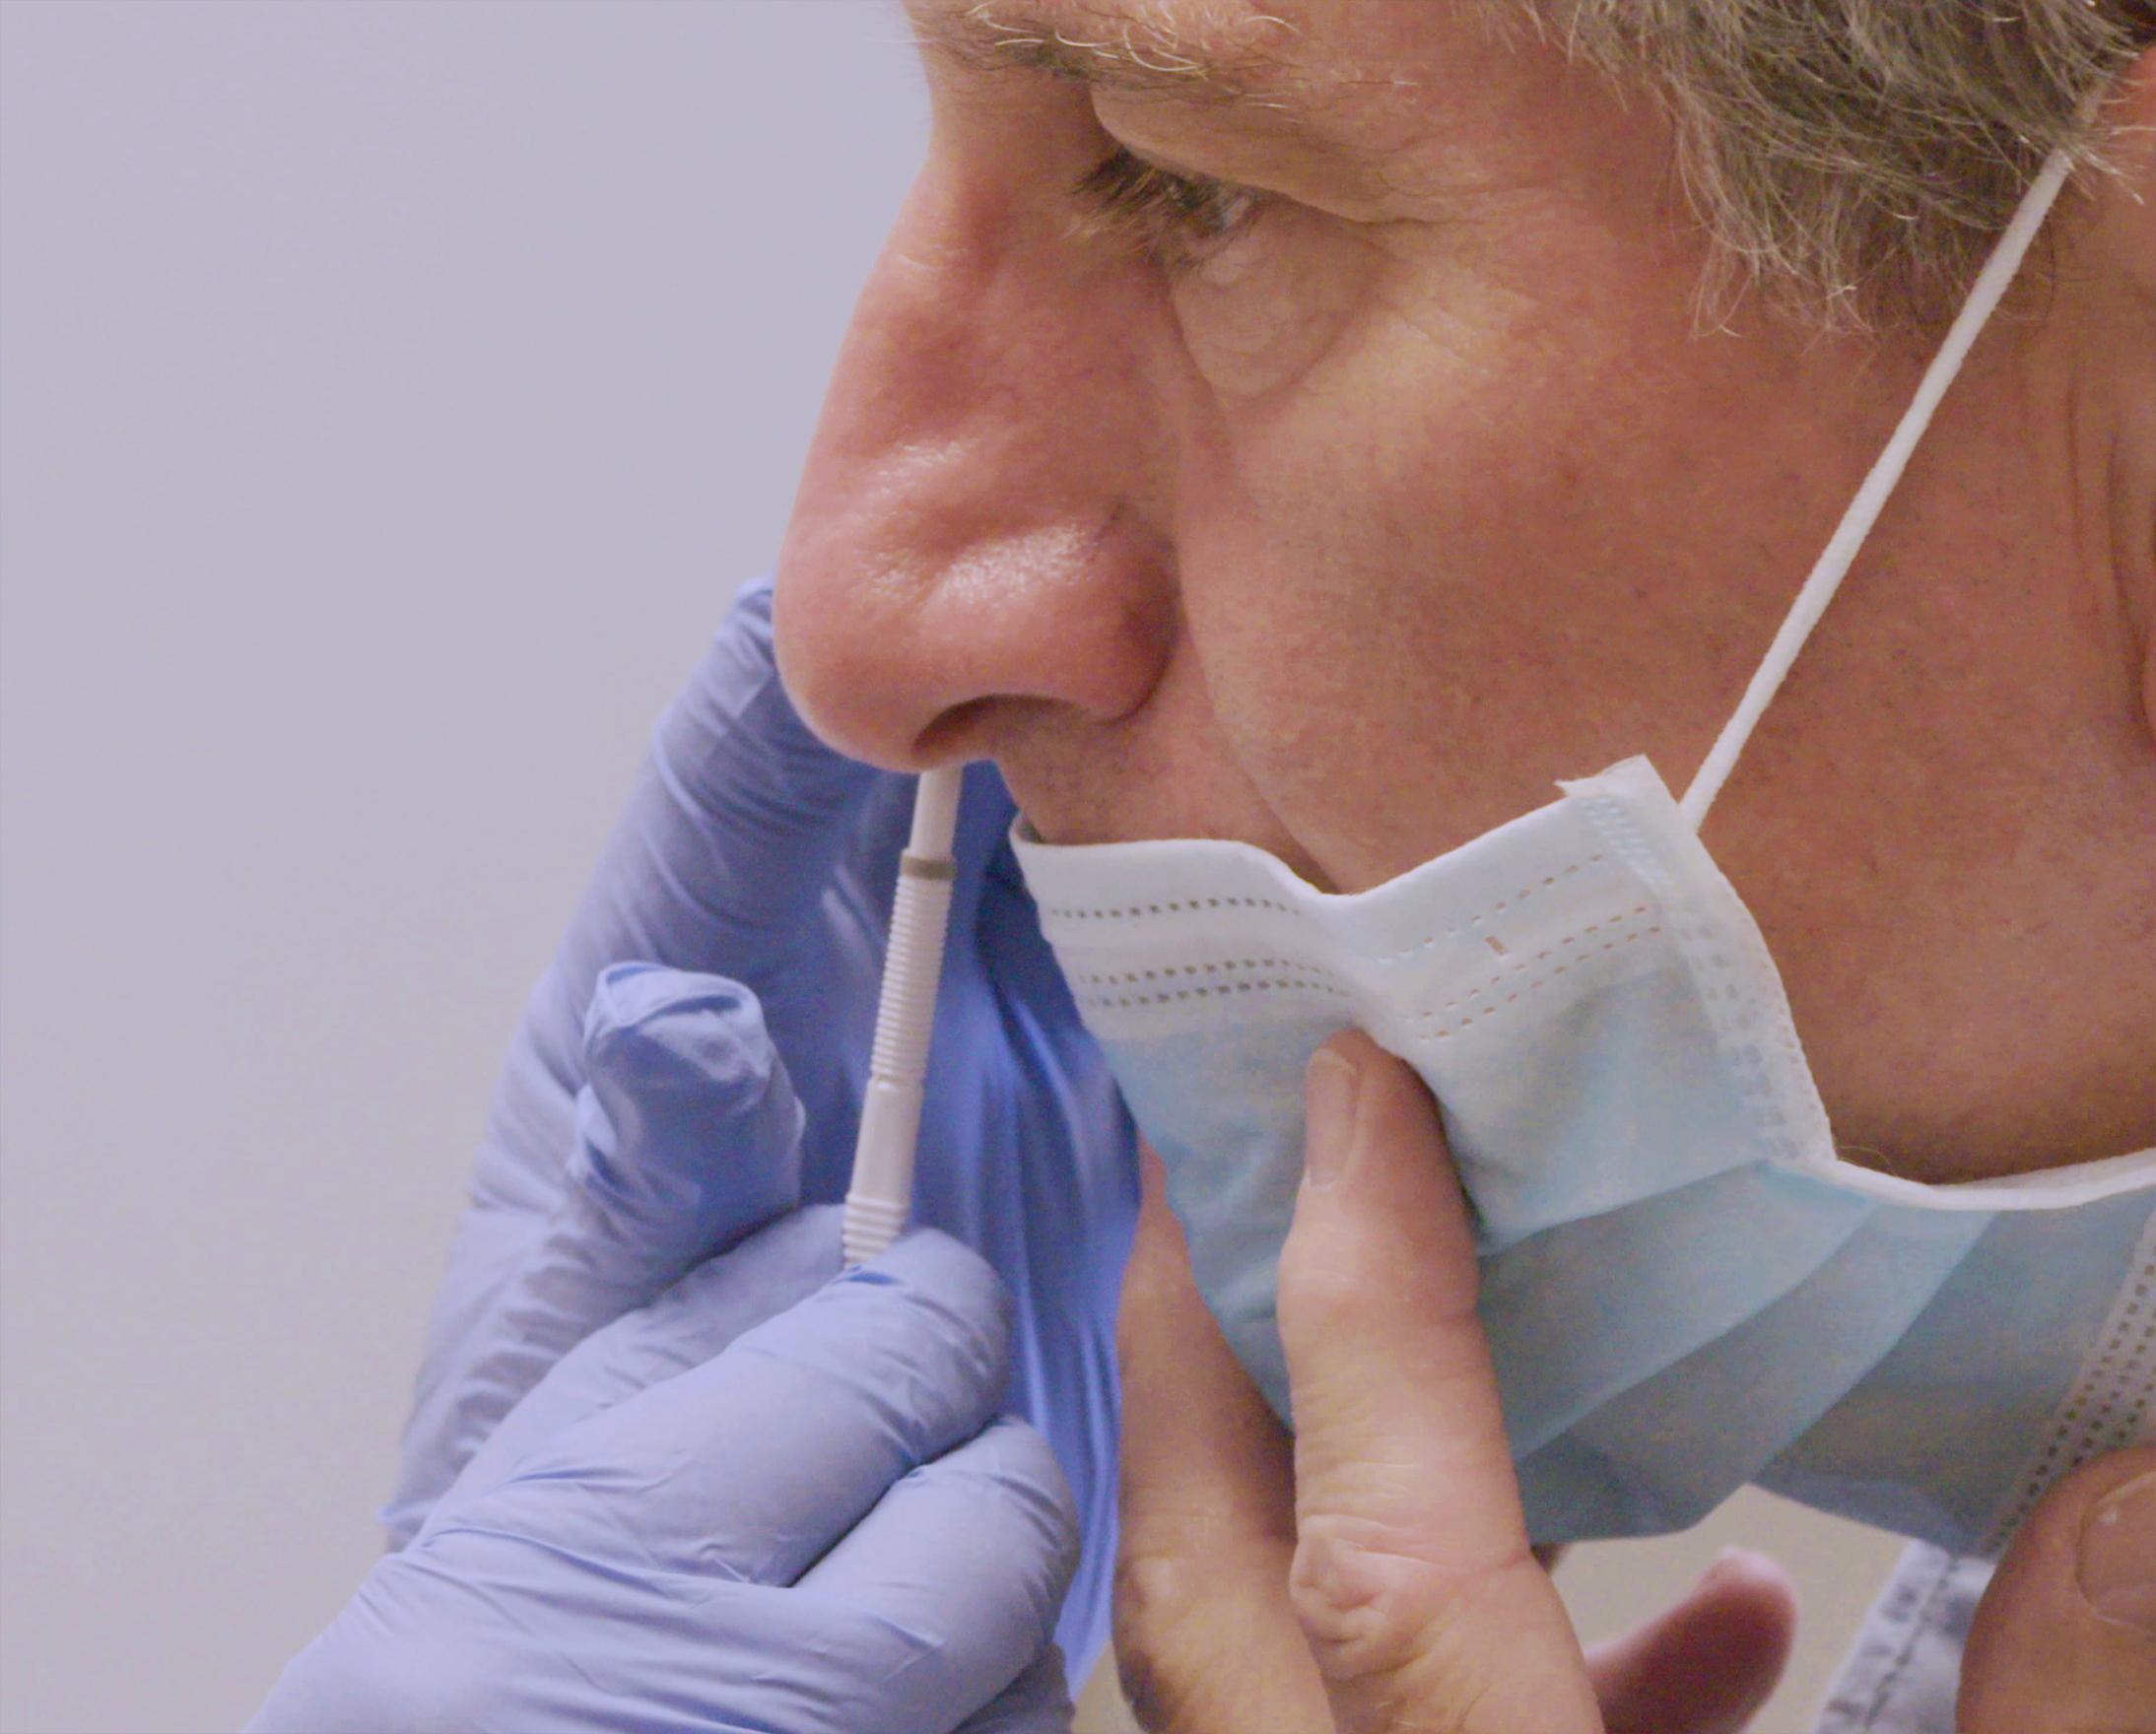 A gloved hand swabs a man's nostril with a Cue Wand